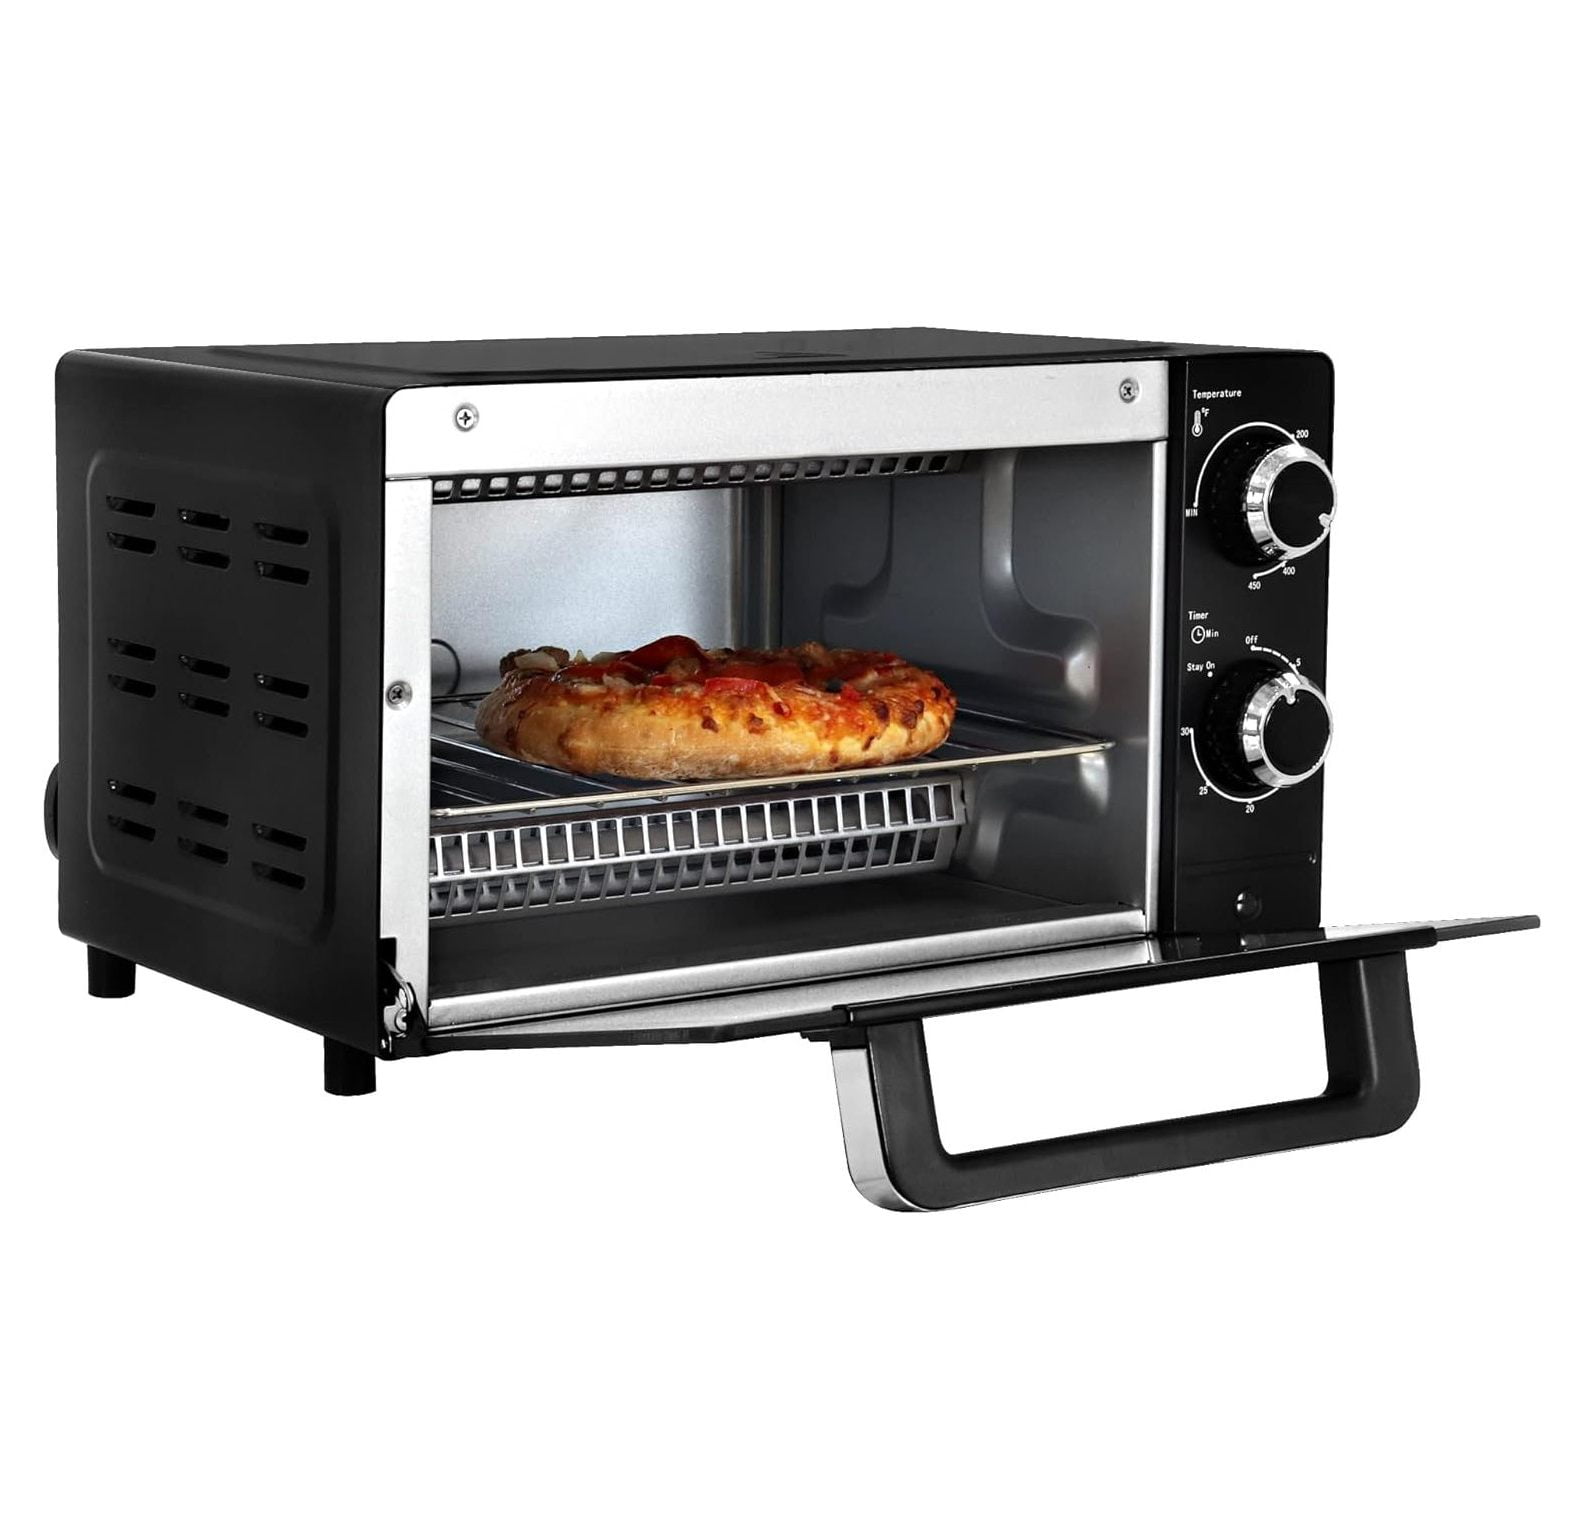 Toaster Oven Countertop, 12L Toaster Oven with Natural Convection, Compact  Size, Easy to Control with Timer-Bake-Broil-Toast Setting, Stainless Steel